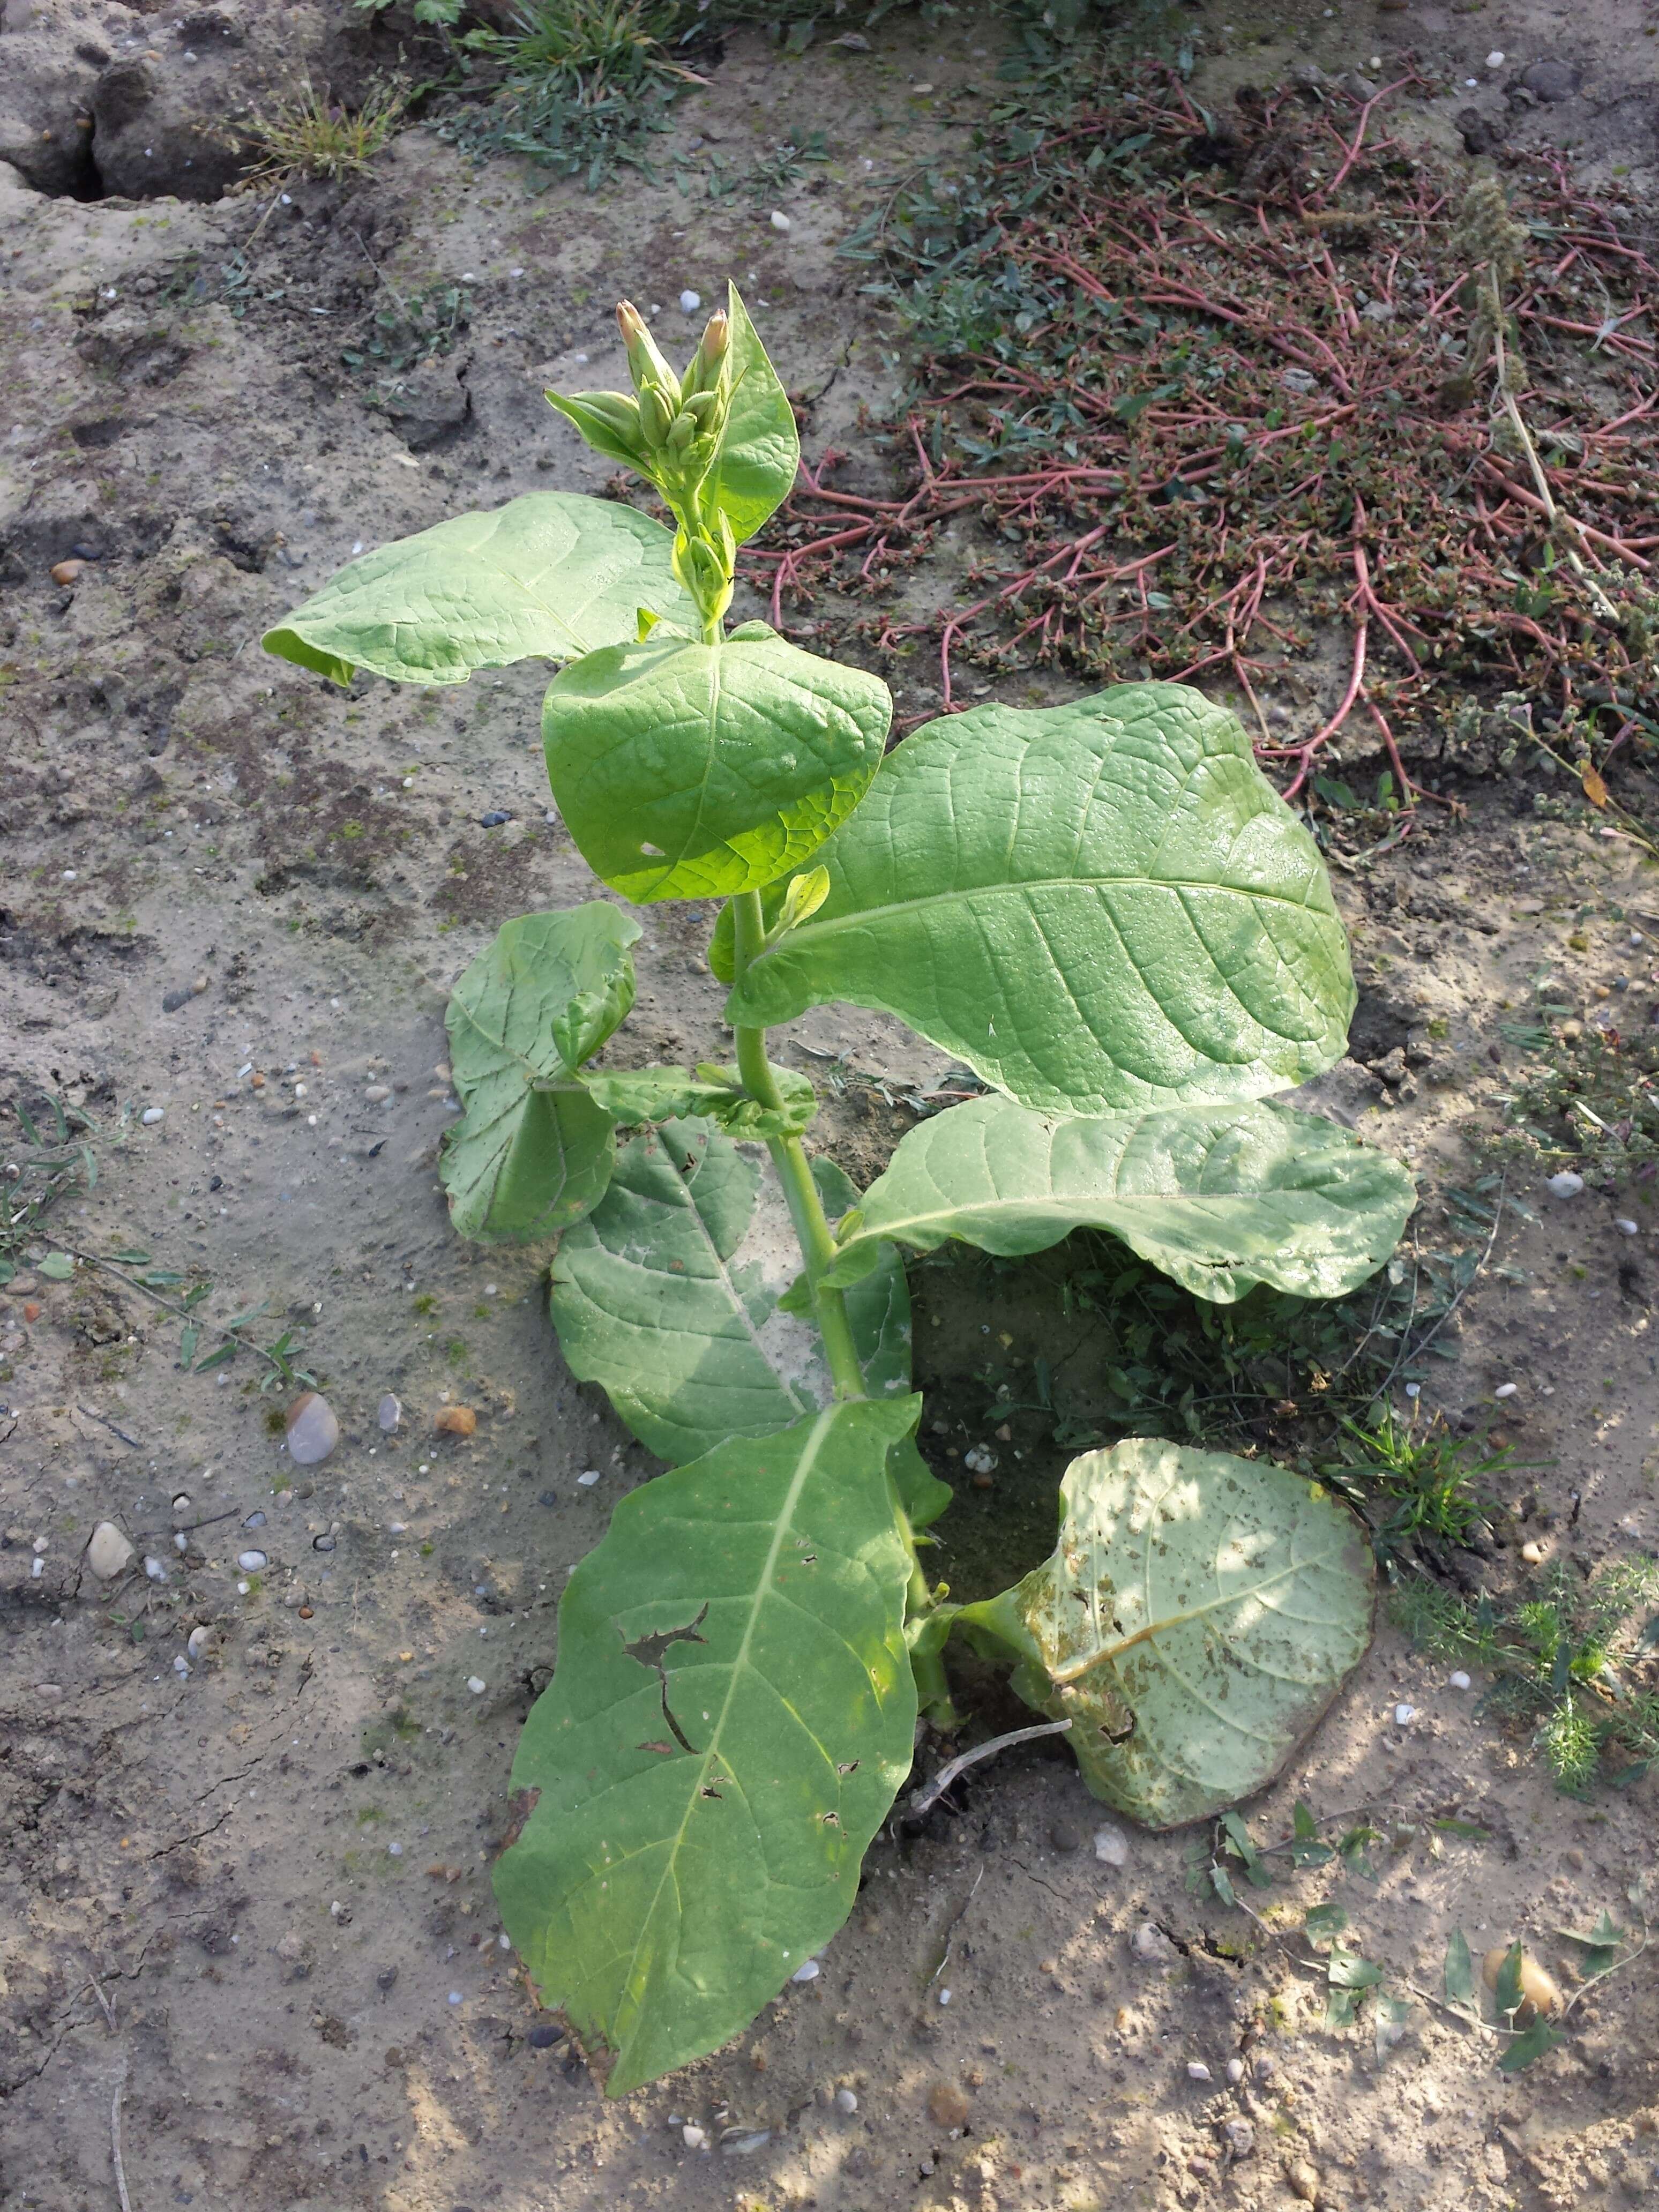 Image of cultivated tobacco